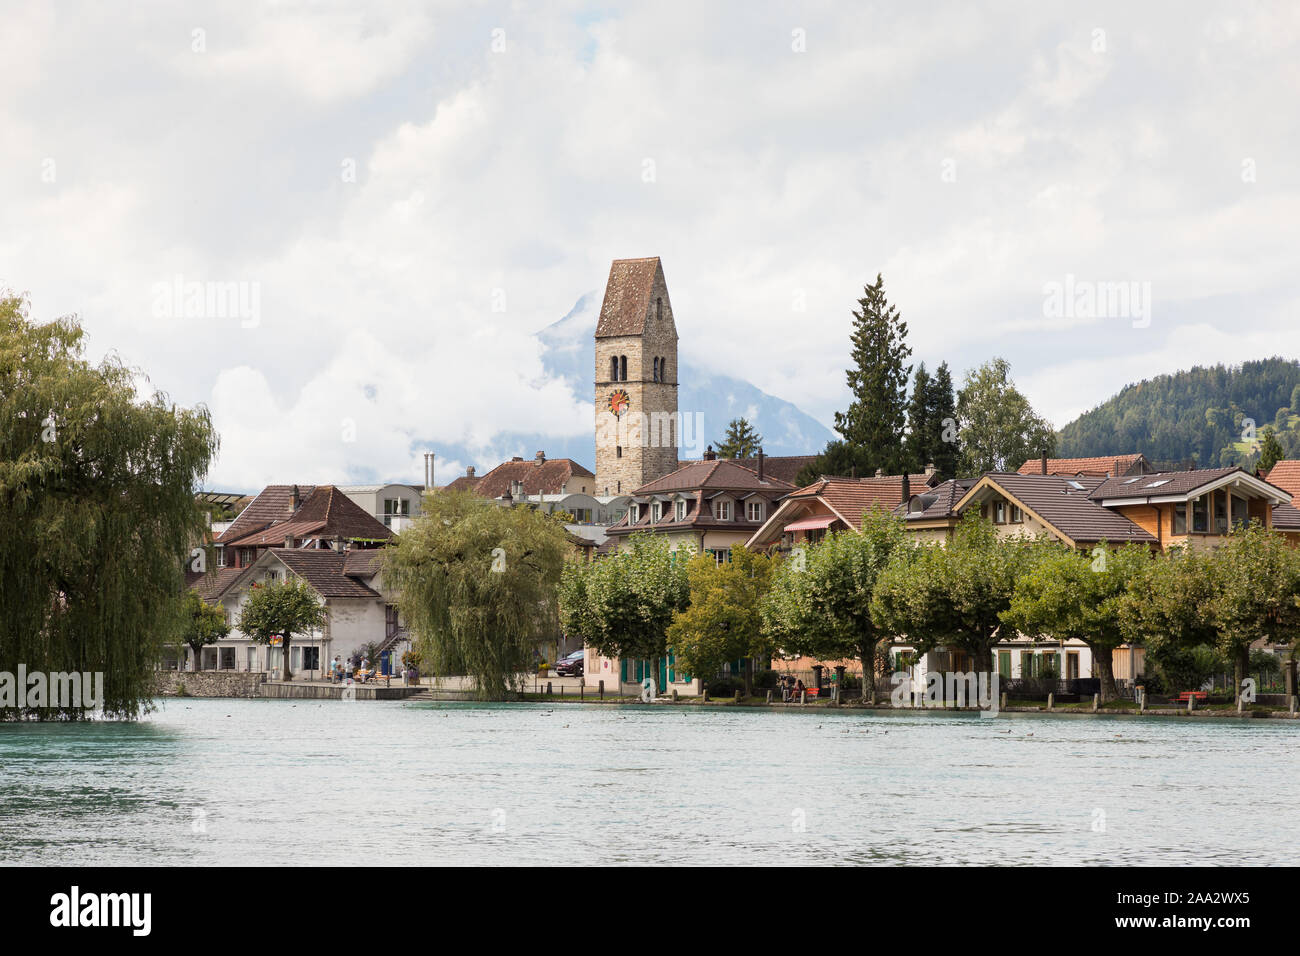 Unterseen, Interlaken, Switzerland: Trees line the bank of the river Aare, behind which the tower and clock of the old church rise above the rooftops. Stock Photo